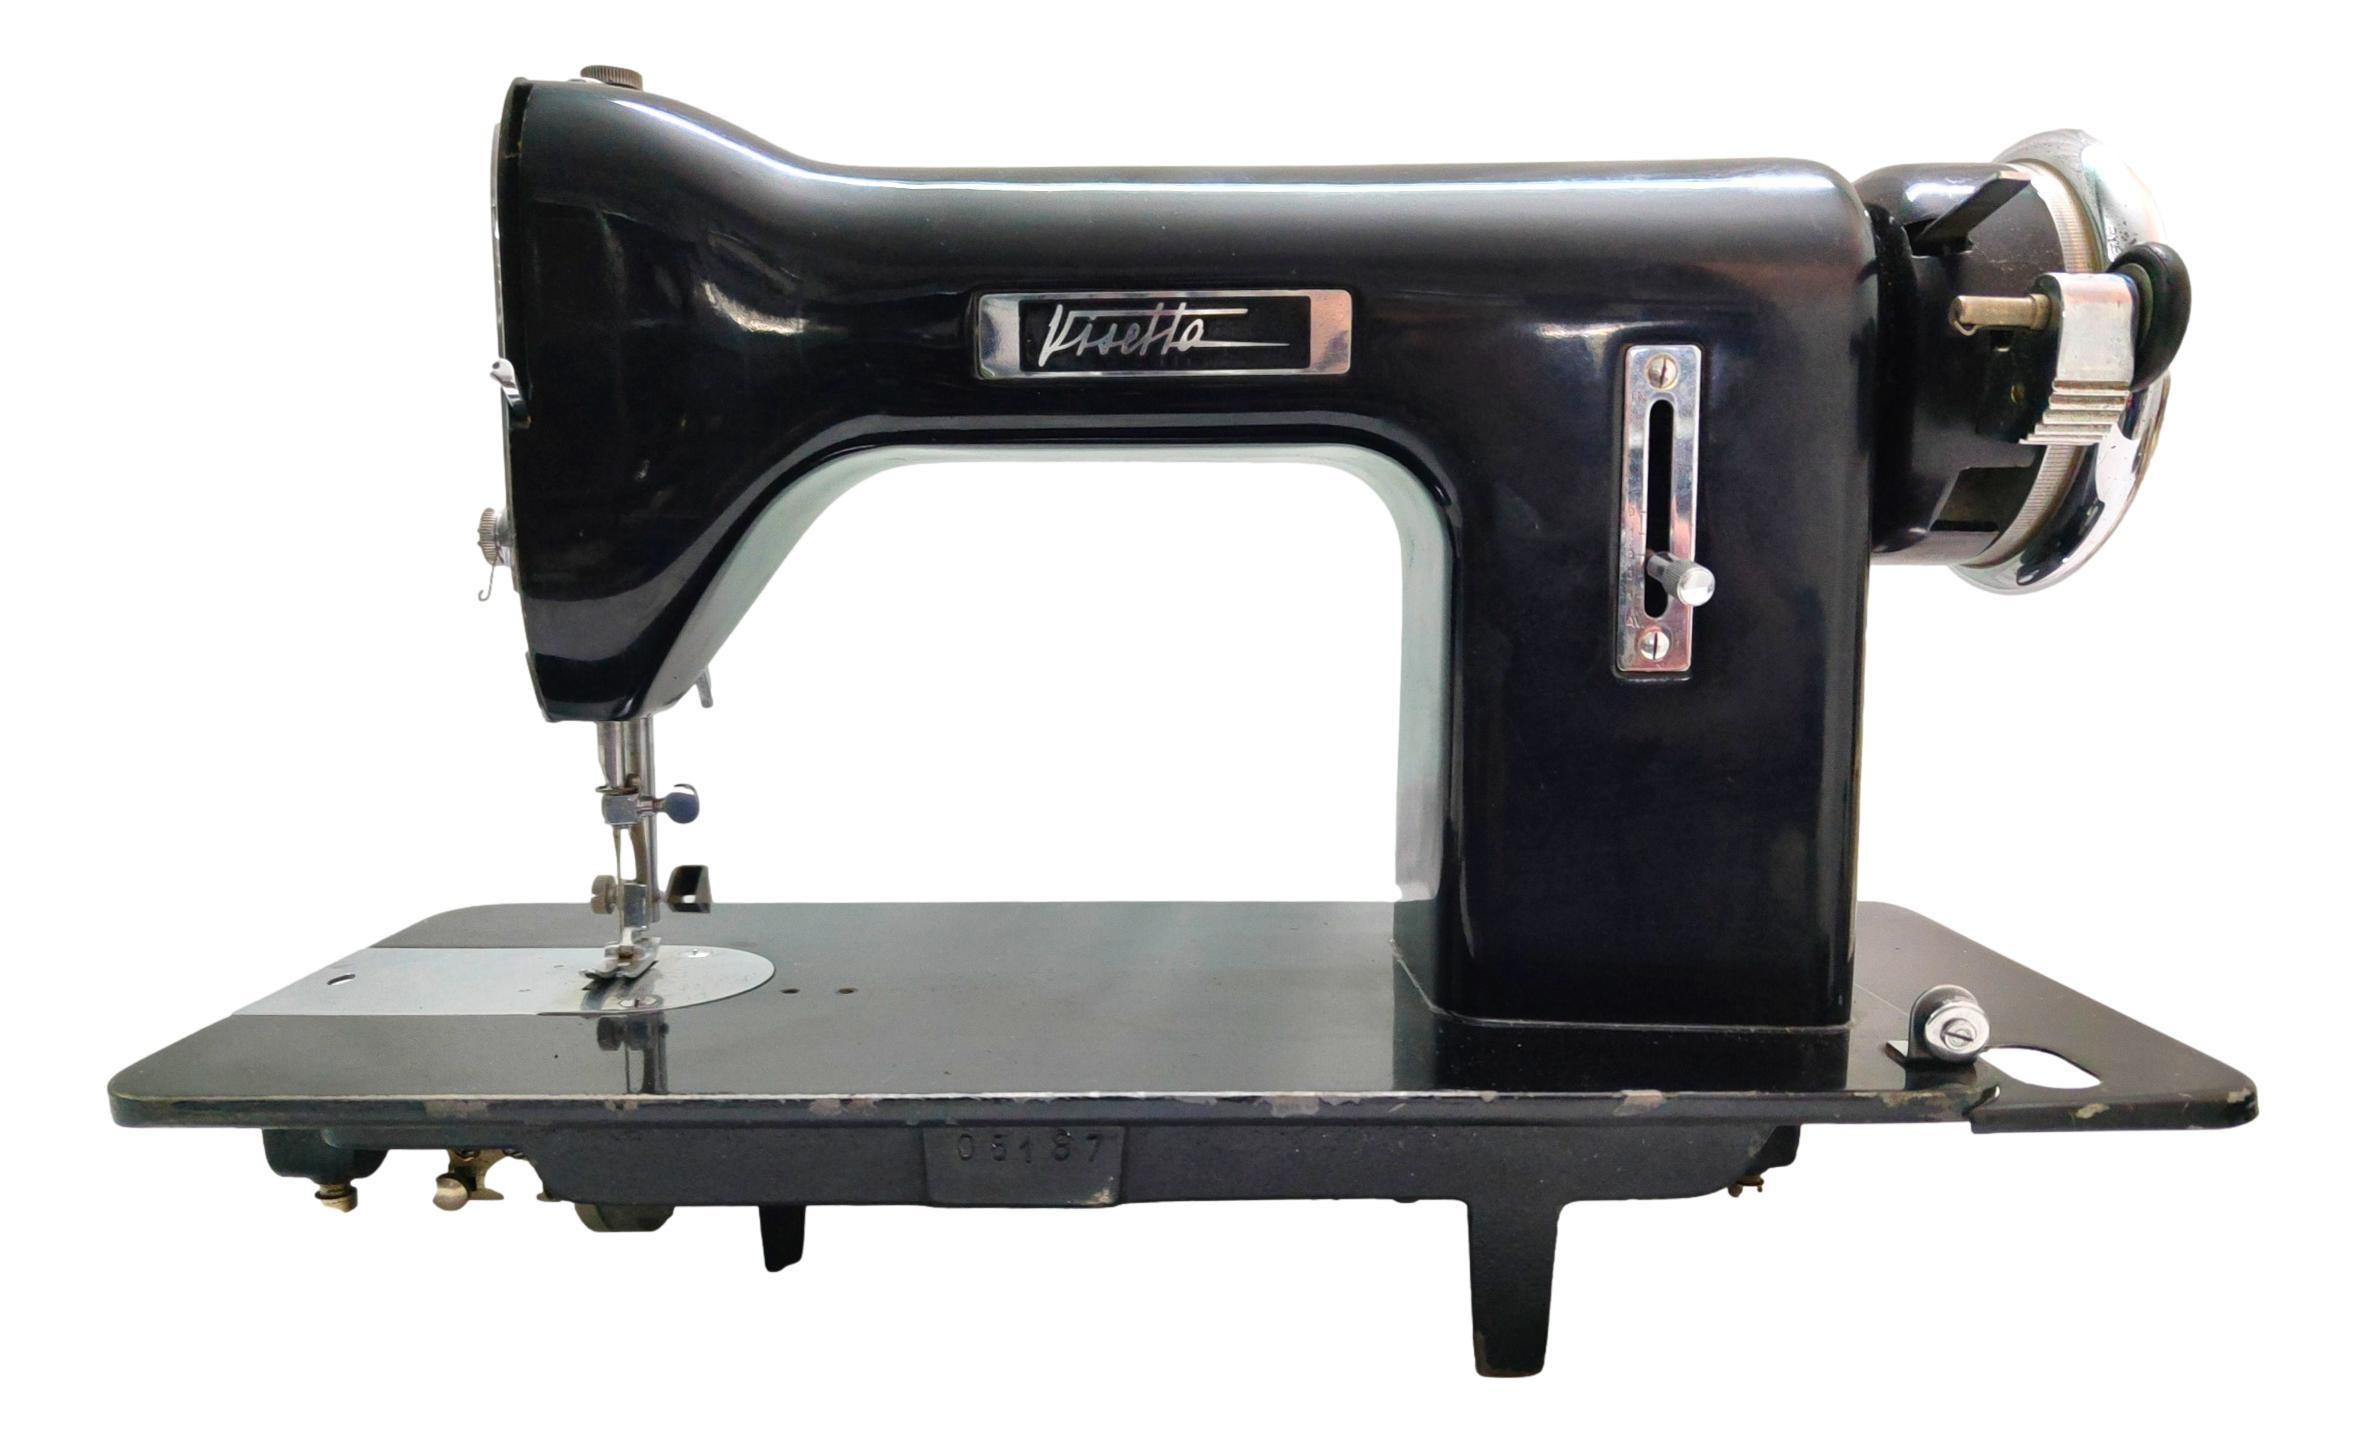 Sewing machine model VISETTA, Italvisetta production, original of the 40s, designed by Gio Ponti and reported in the archive of the great designer
very rare glossy black color
What is sold is exactly the machine in the picture, for collector's use